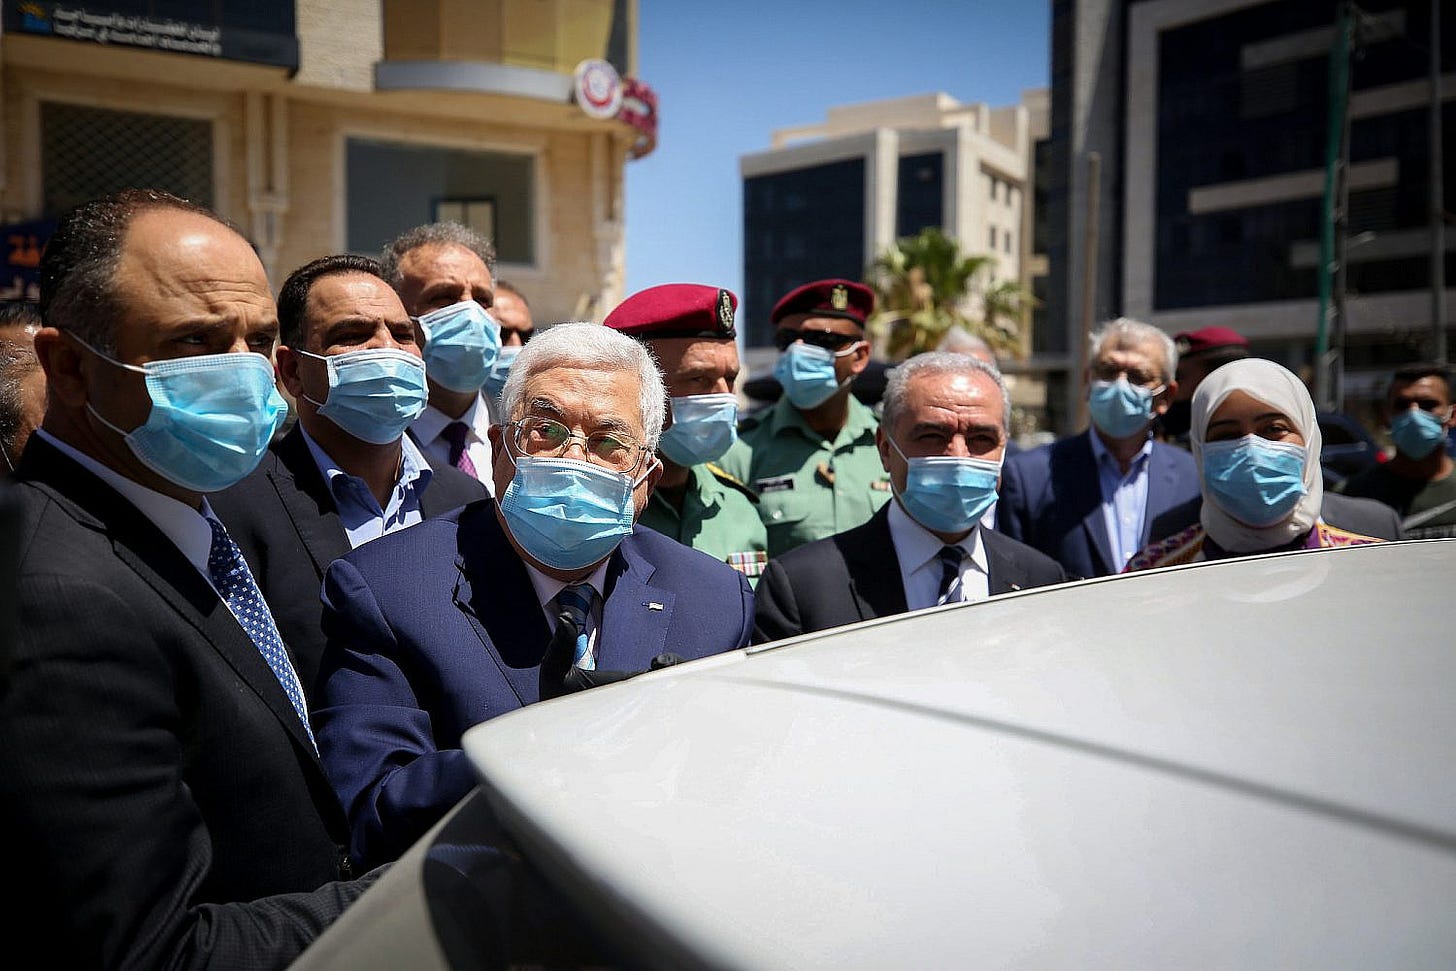 Palestinian President Mahmoud Abbas seen during a tour in the West Bank city of Ramallah, May 15, 2020. (Flash90)